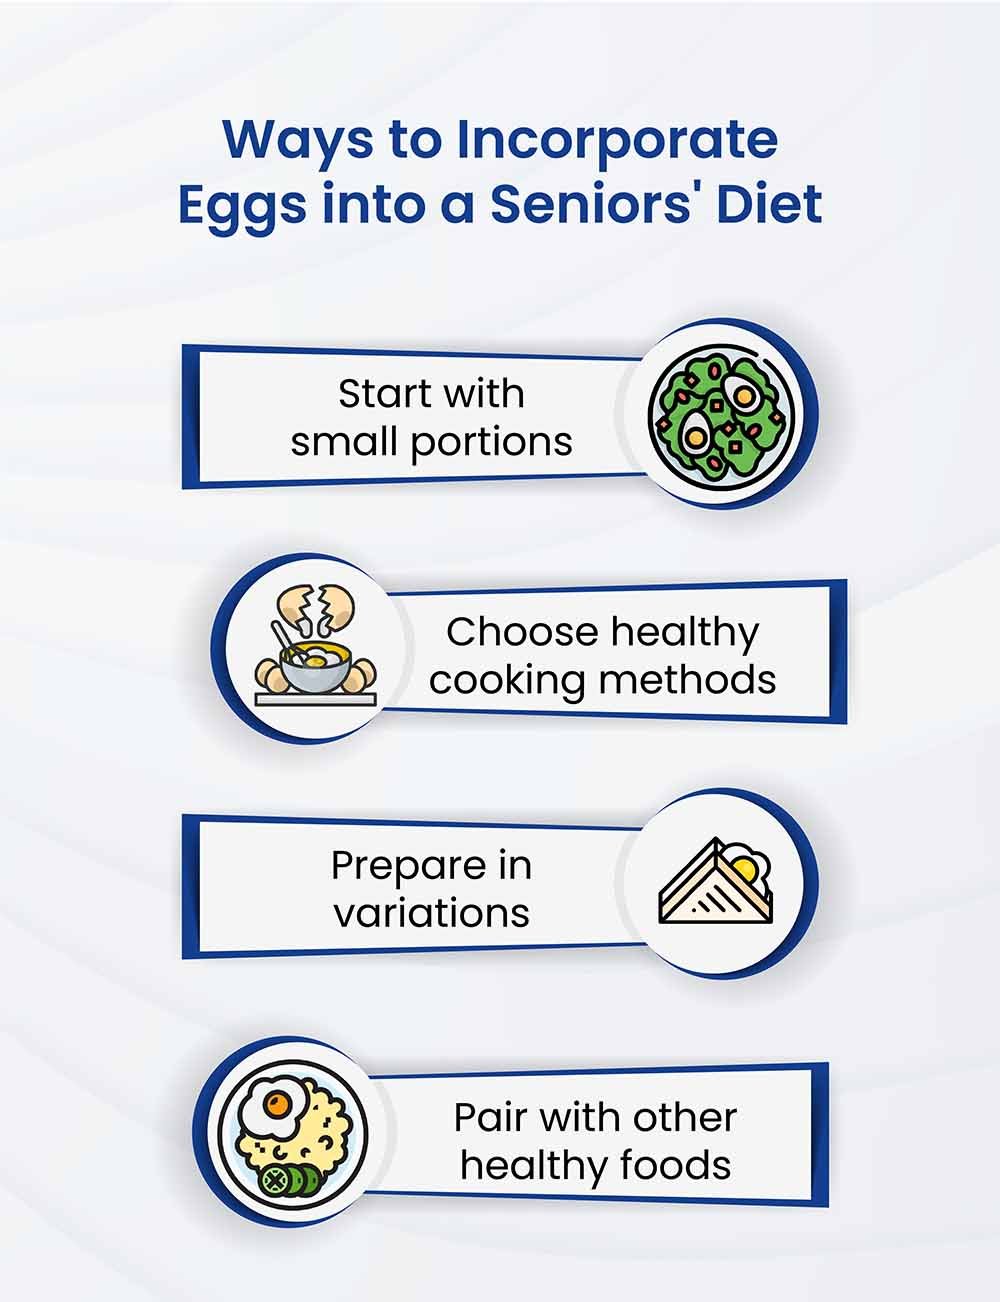 Ways Seniors Can Incorporate Eggs into Their Diet